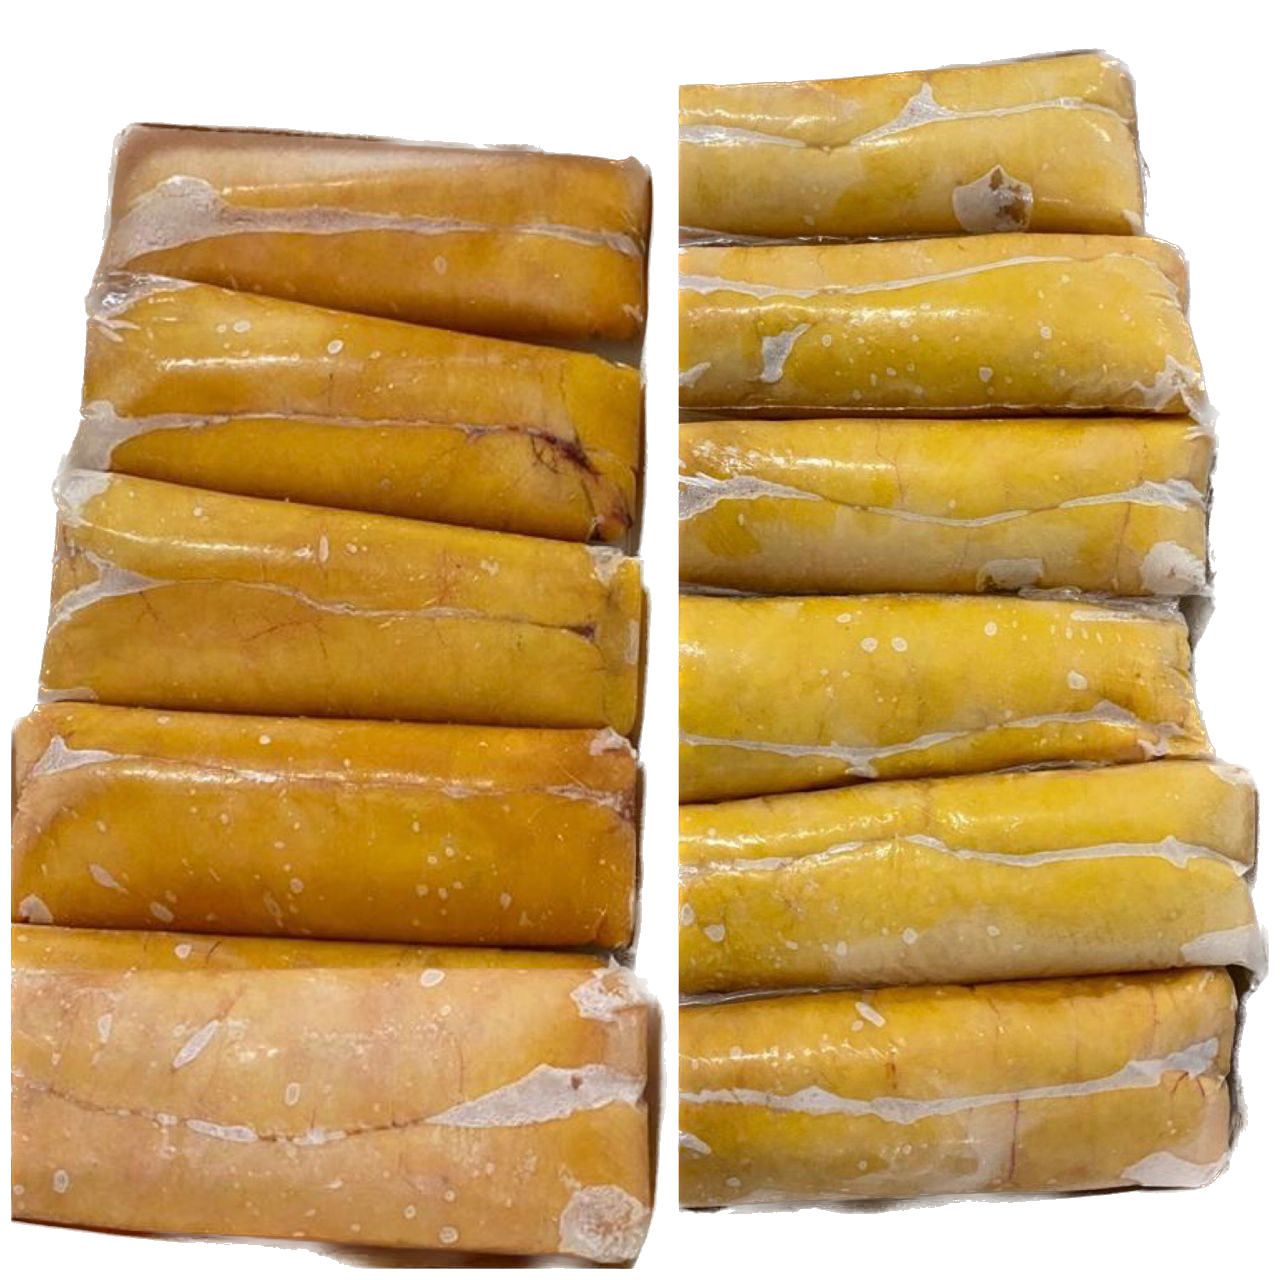 Bottarga is a delicacy of salted, cured fish roe pouch, typically of the grey mullet or the bluefin tuna (bottarga di tonno)